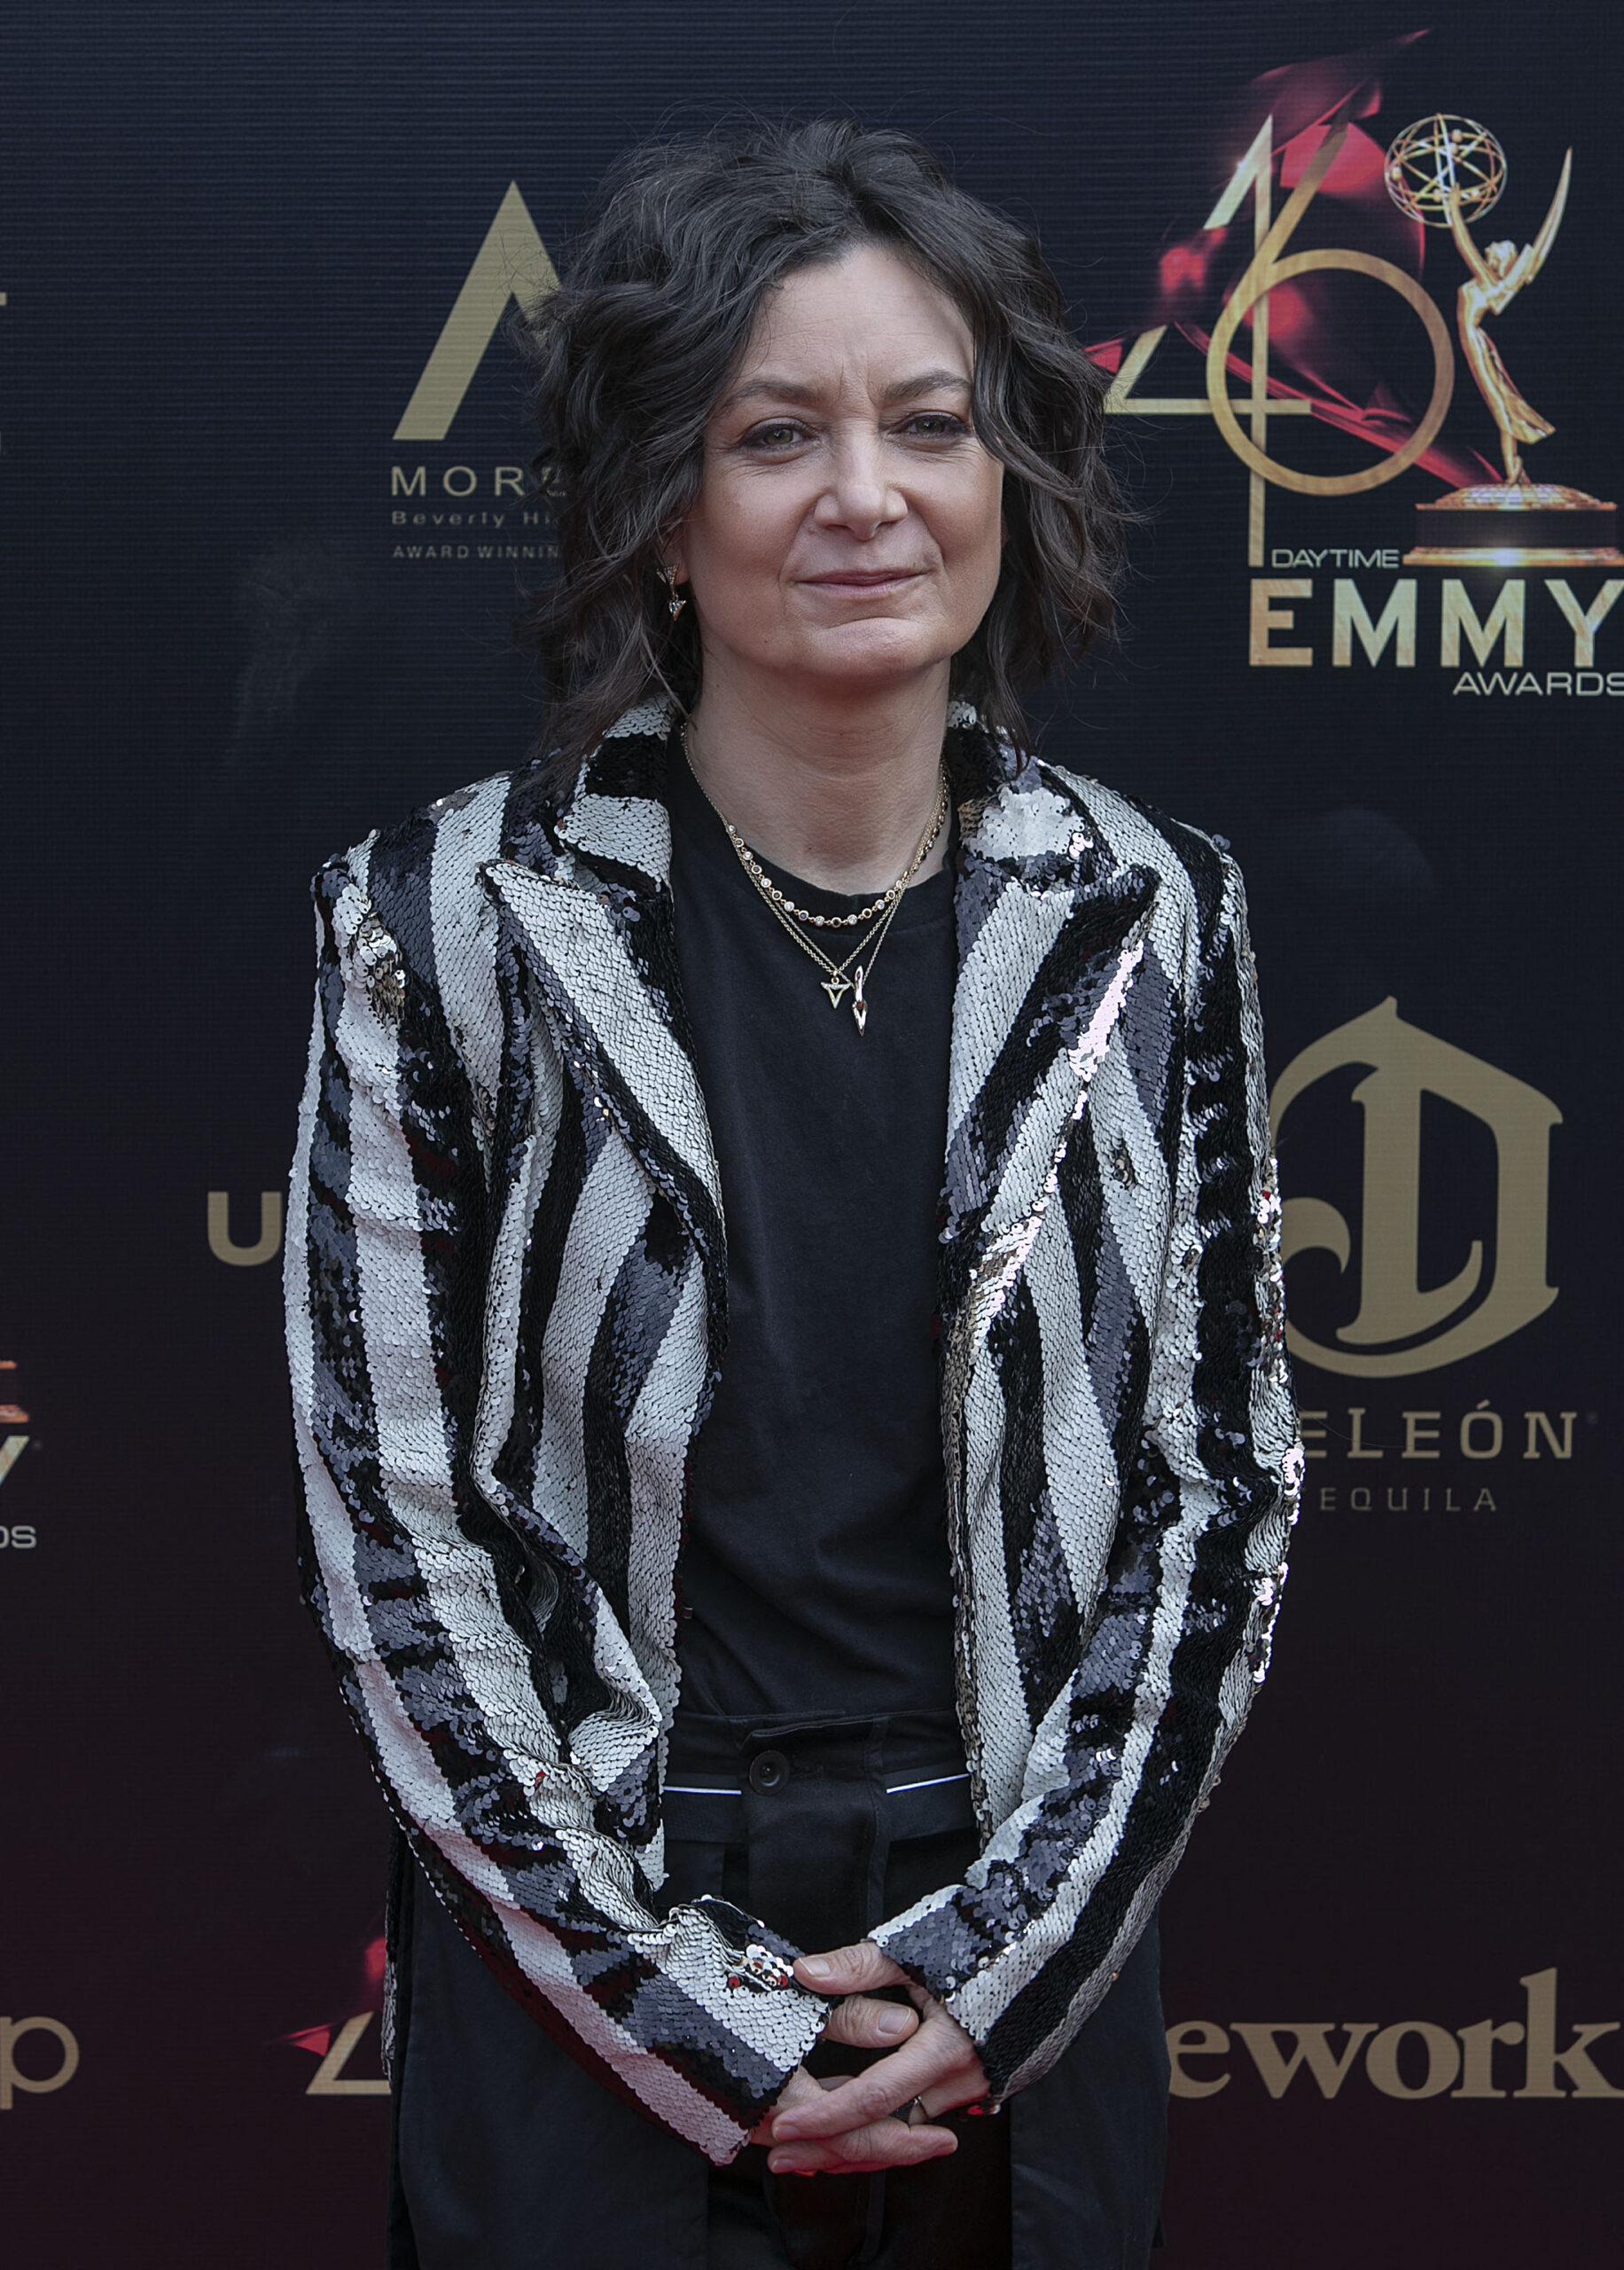 Sara Gilbert at the 46th Annual Daytime Emmy